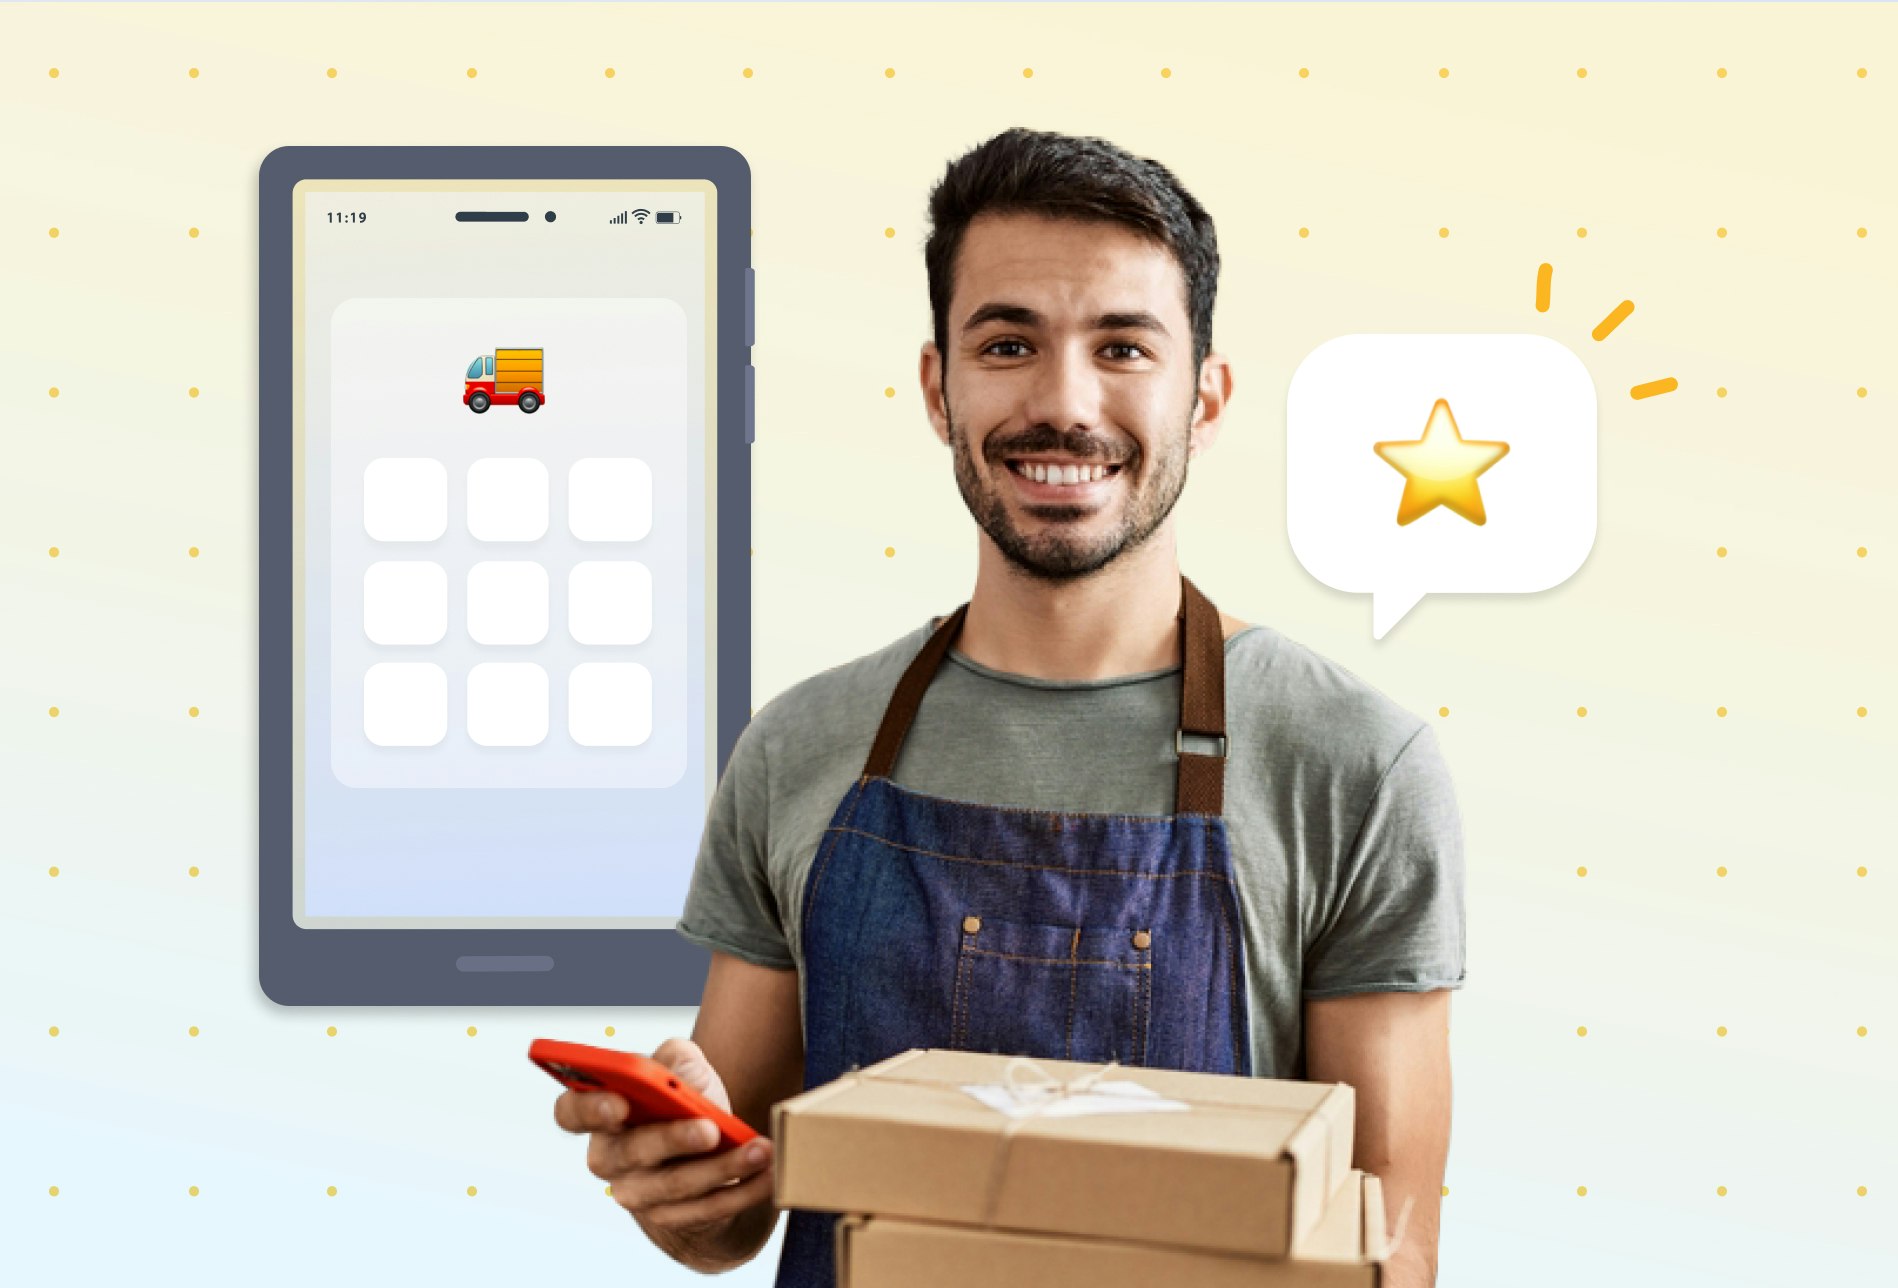 White, male delivery driver with a beard, holding a mobile phone and smiling. He carries two brown packages in his left hand. The background has a mobile phone featuring a delivery truck icon.